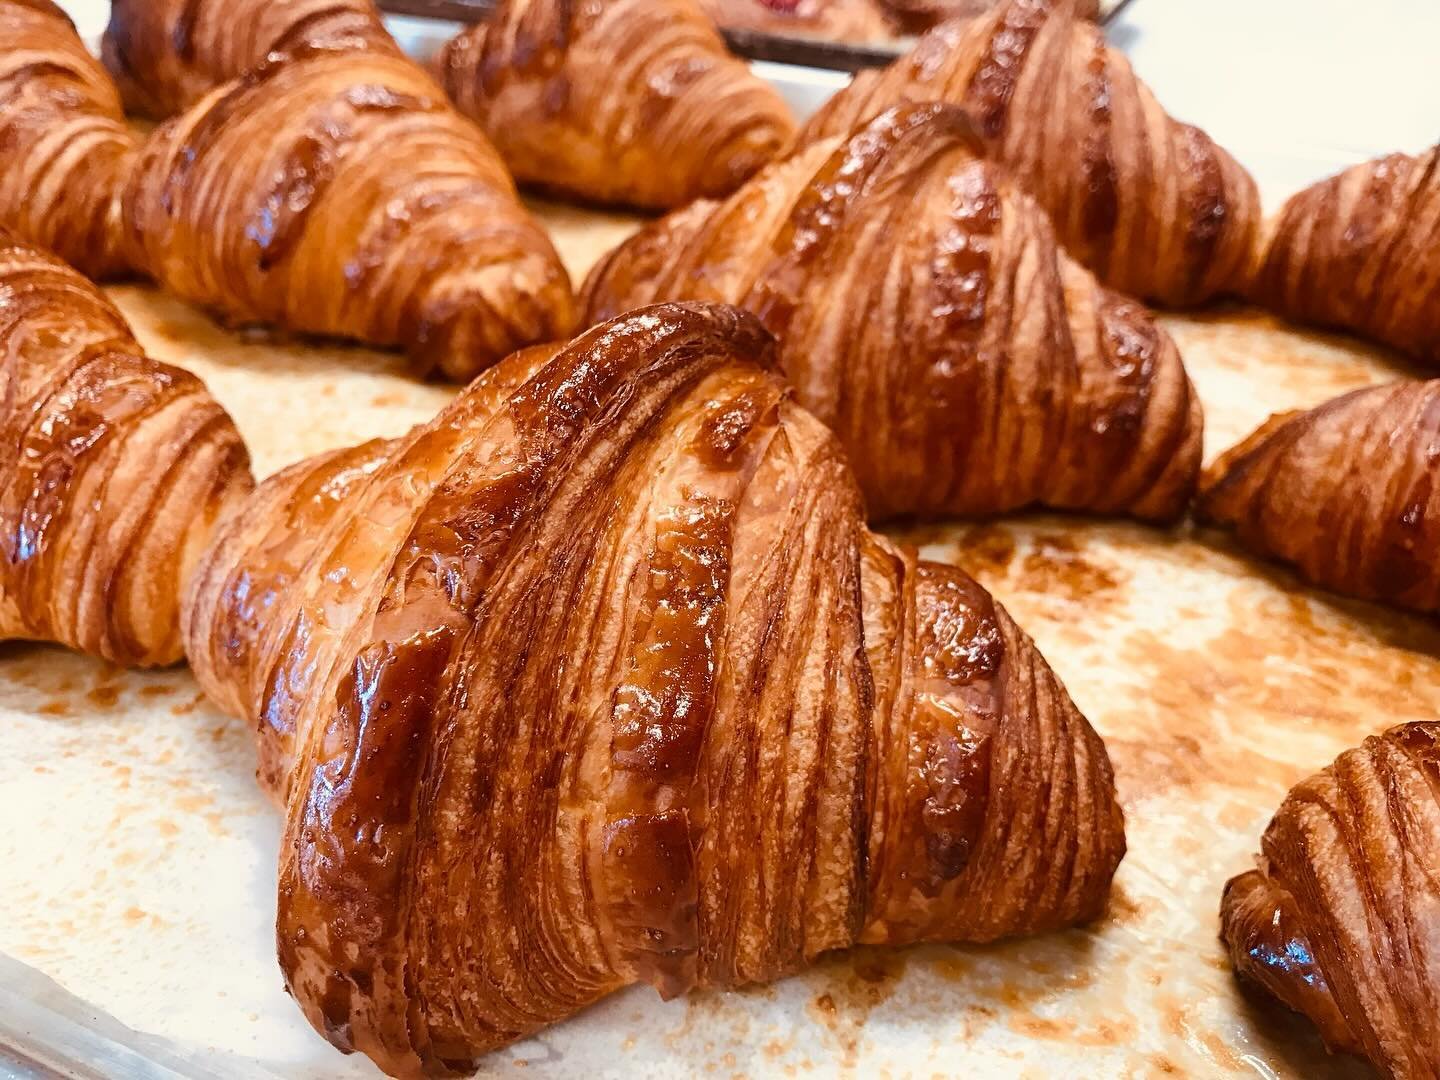 Start this beautiful sunny morning with our buttery croissants or fresh herb, quail egg &amp; cheese kouign amann

#croissant #pastry #nationalcroissantday #bakery #boulder #coloradofoodscene #community #bakerylife #5280eats #5280 #foodies #morningco